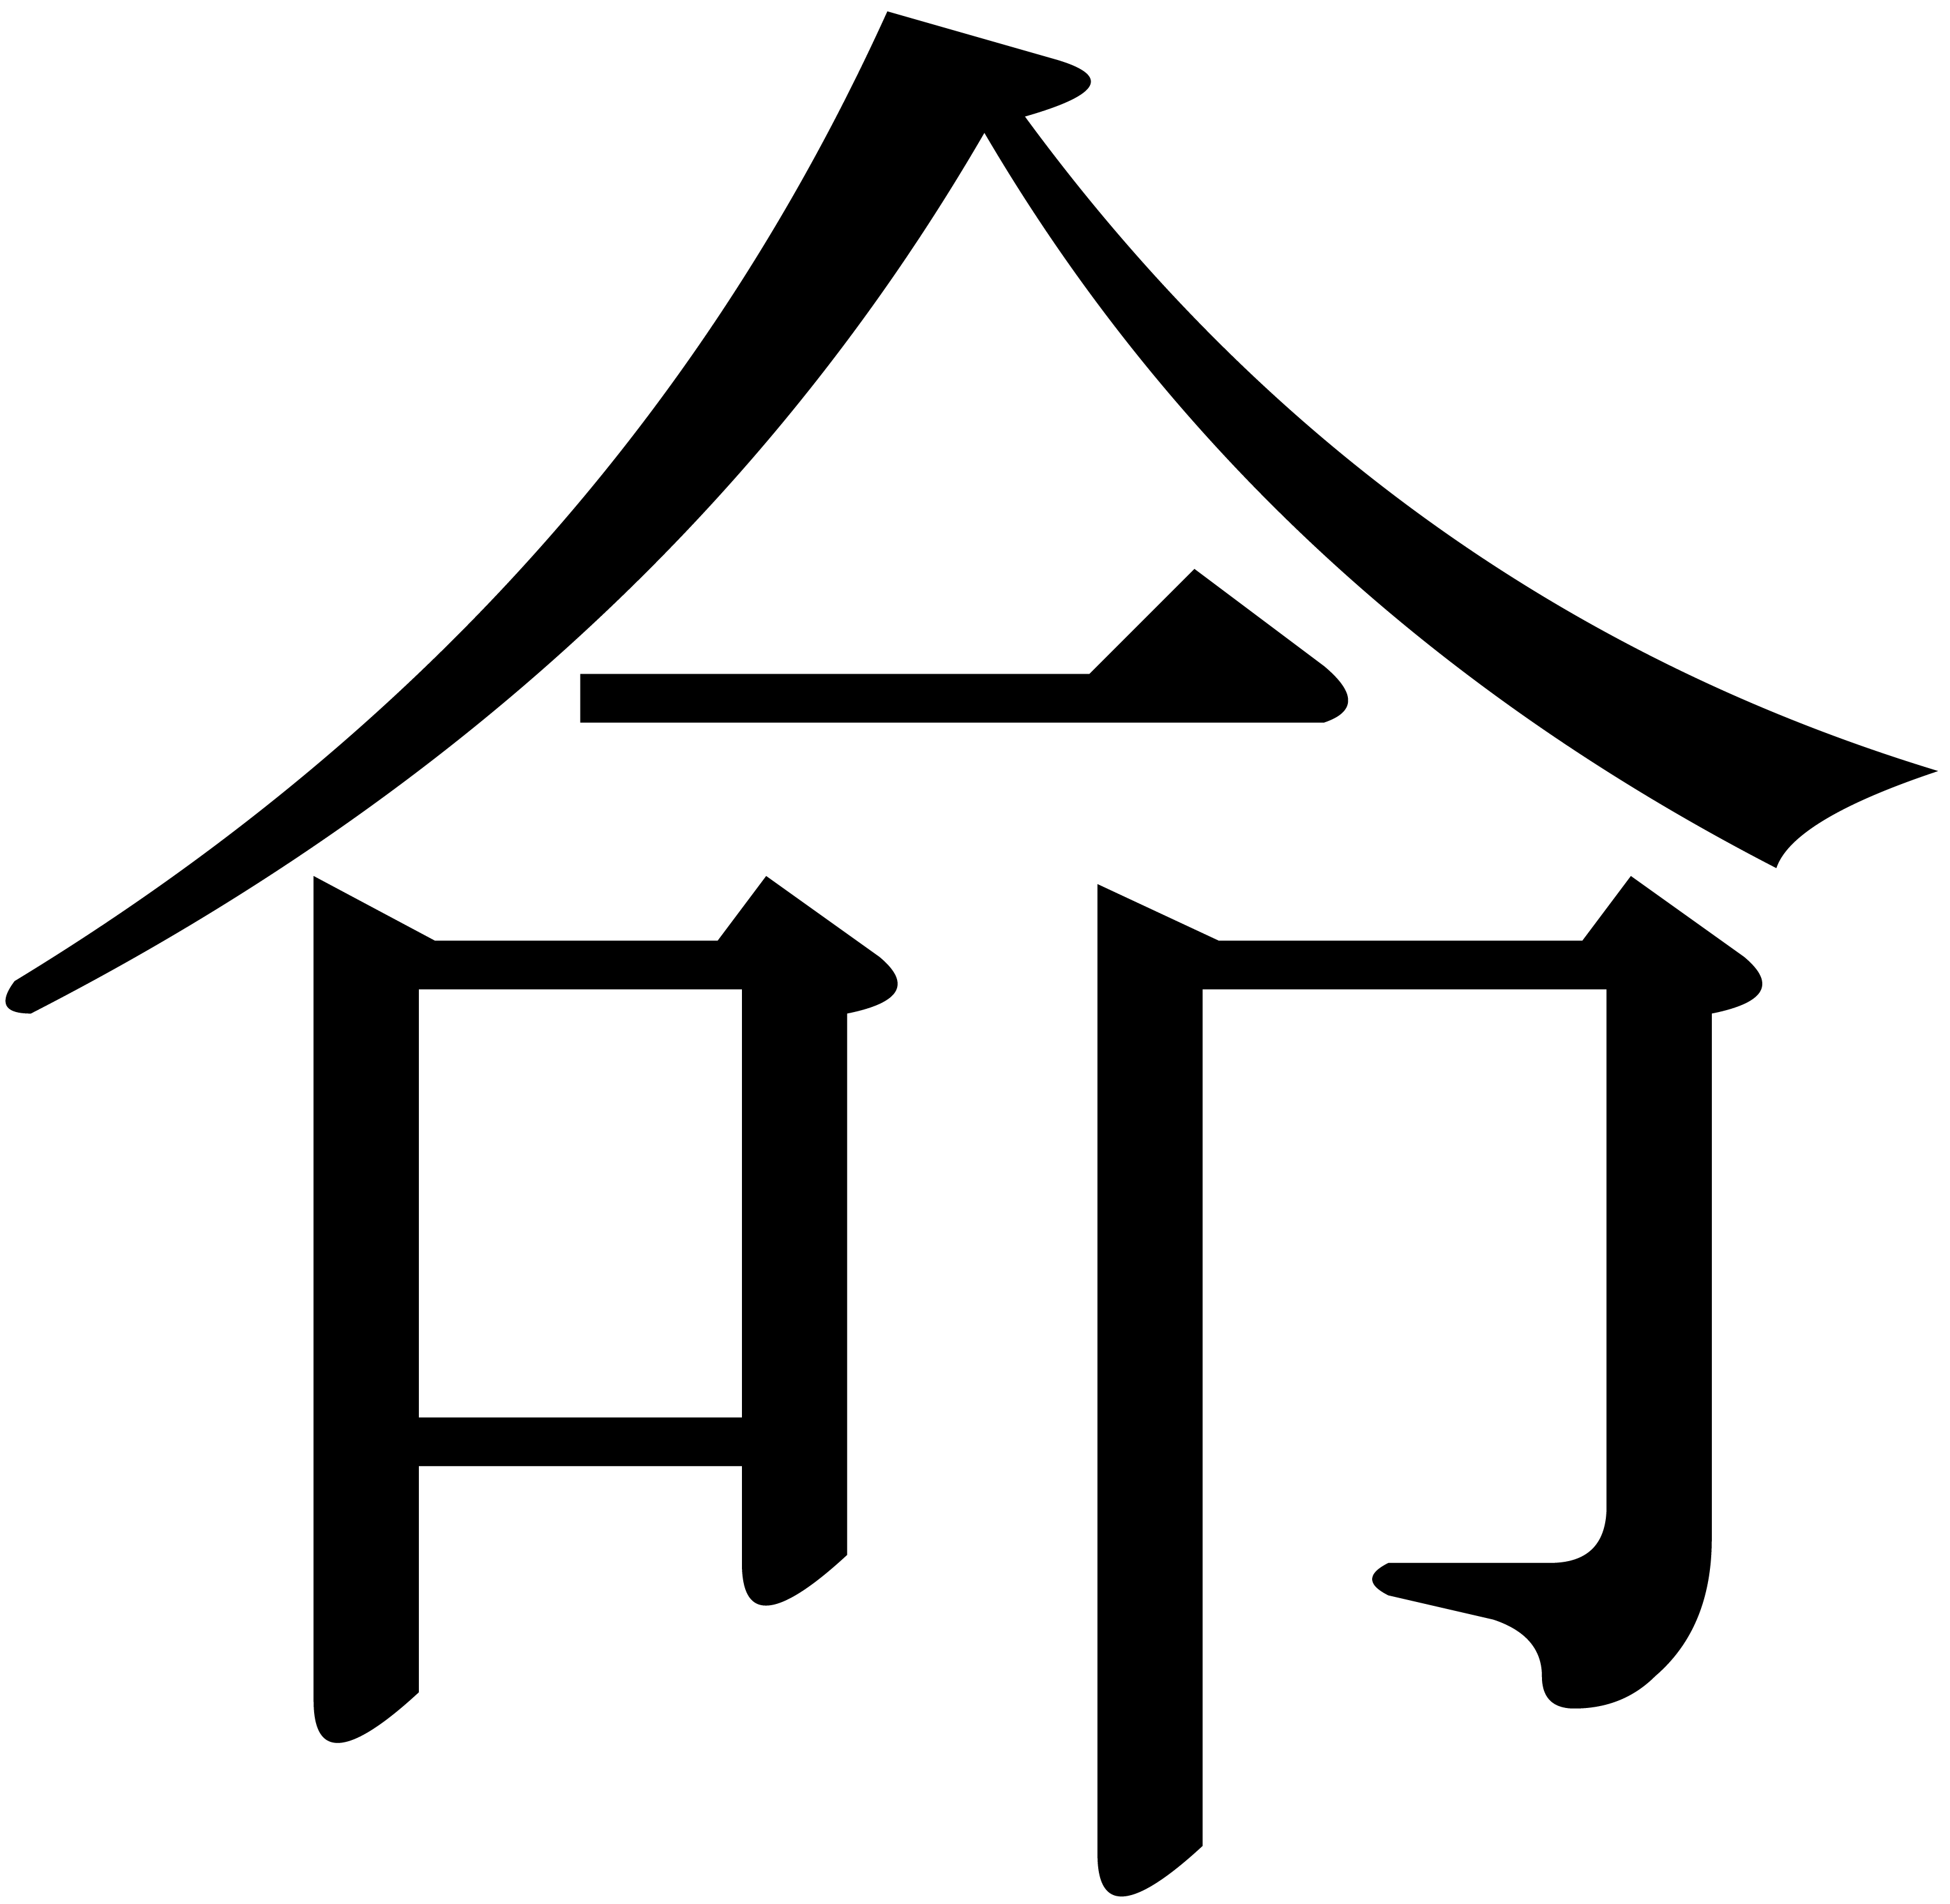 Japanese Symbol Of Life - ClipArt Best